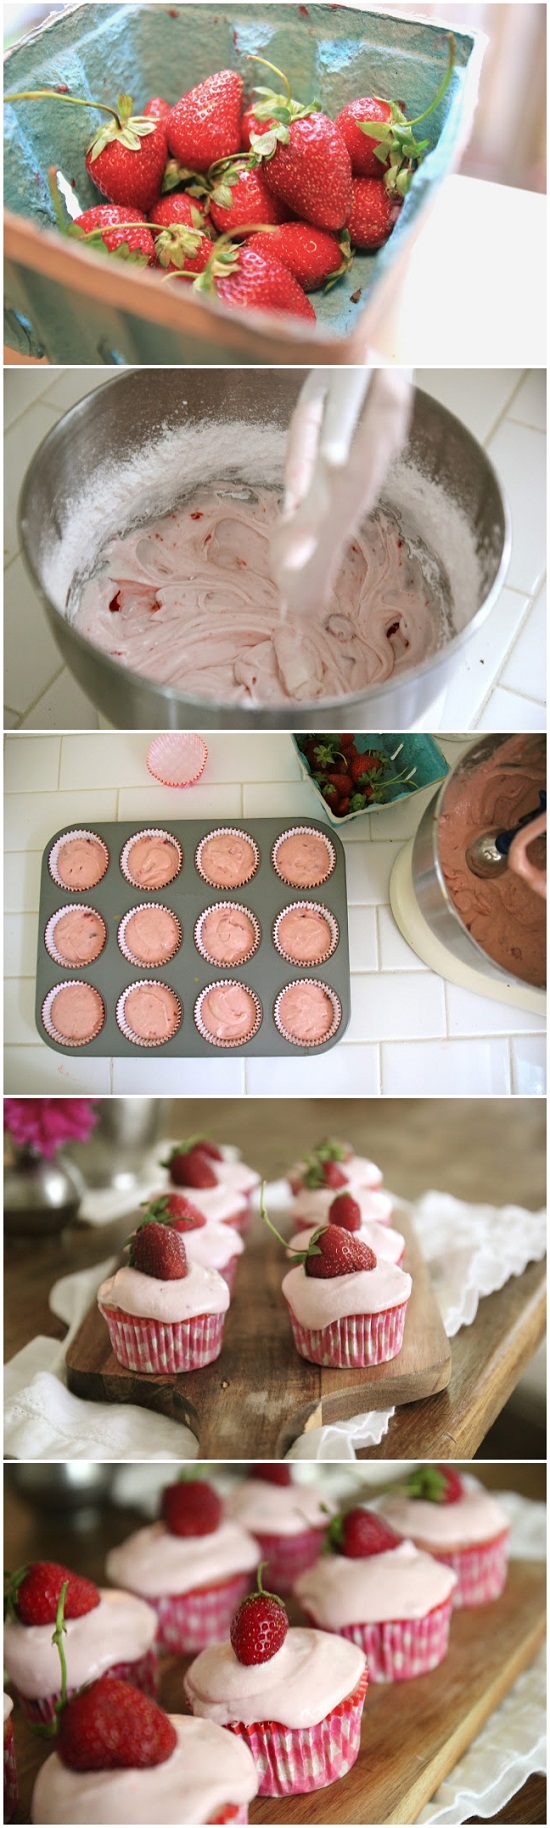 Fresh-Strawberry-Cupcakes-with-Strawberry-Cream-Cheese-Frosting-Recipe